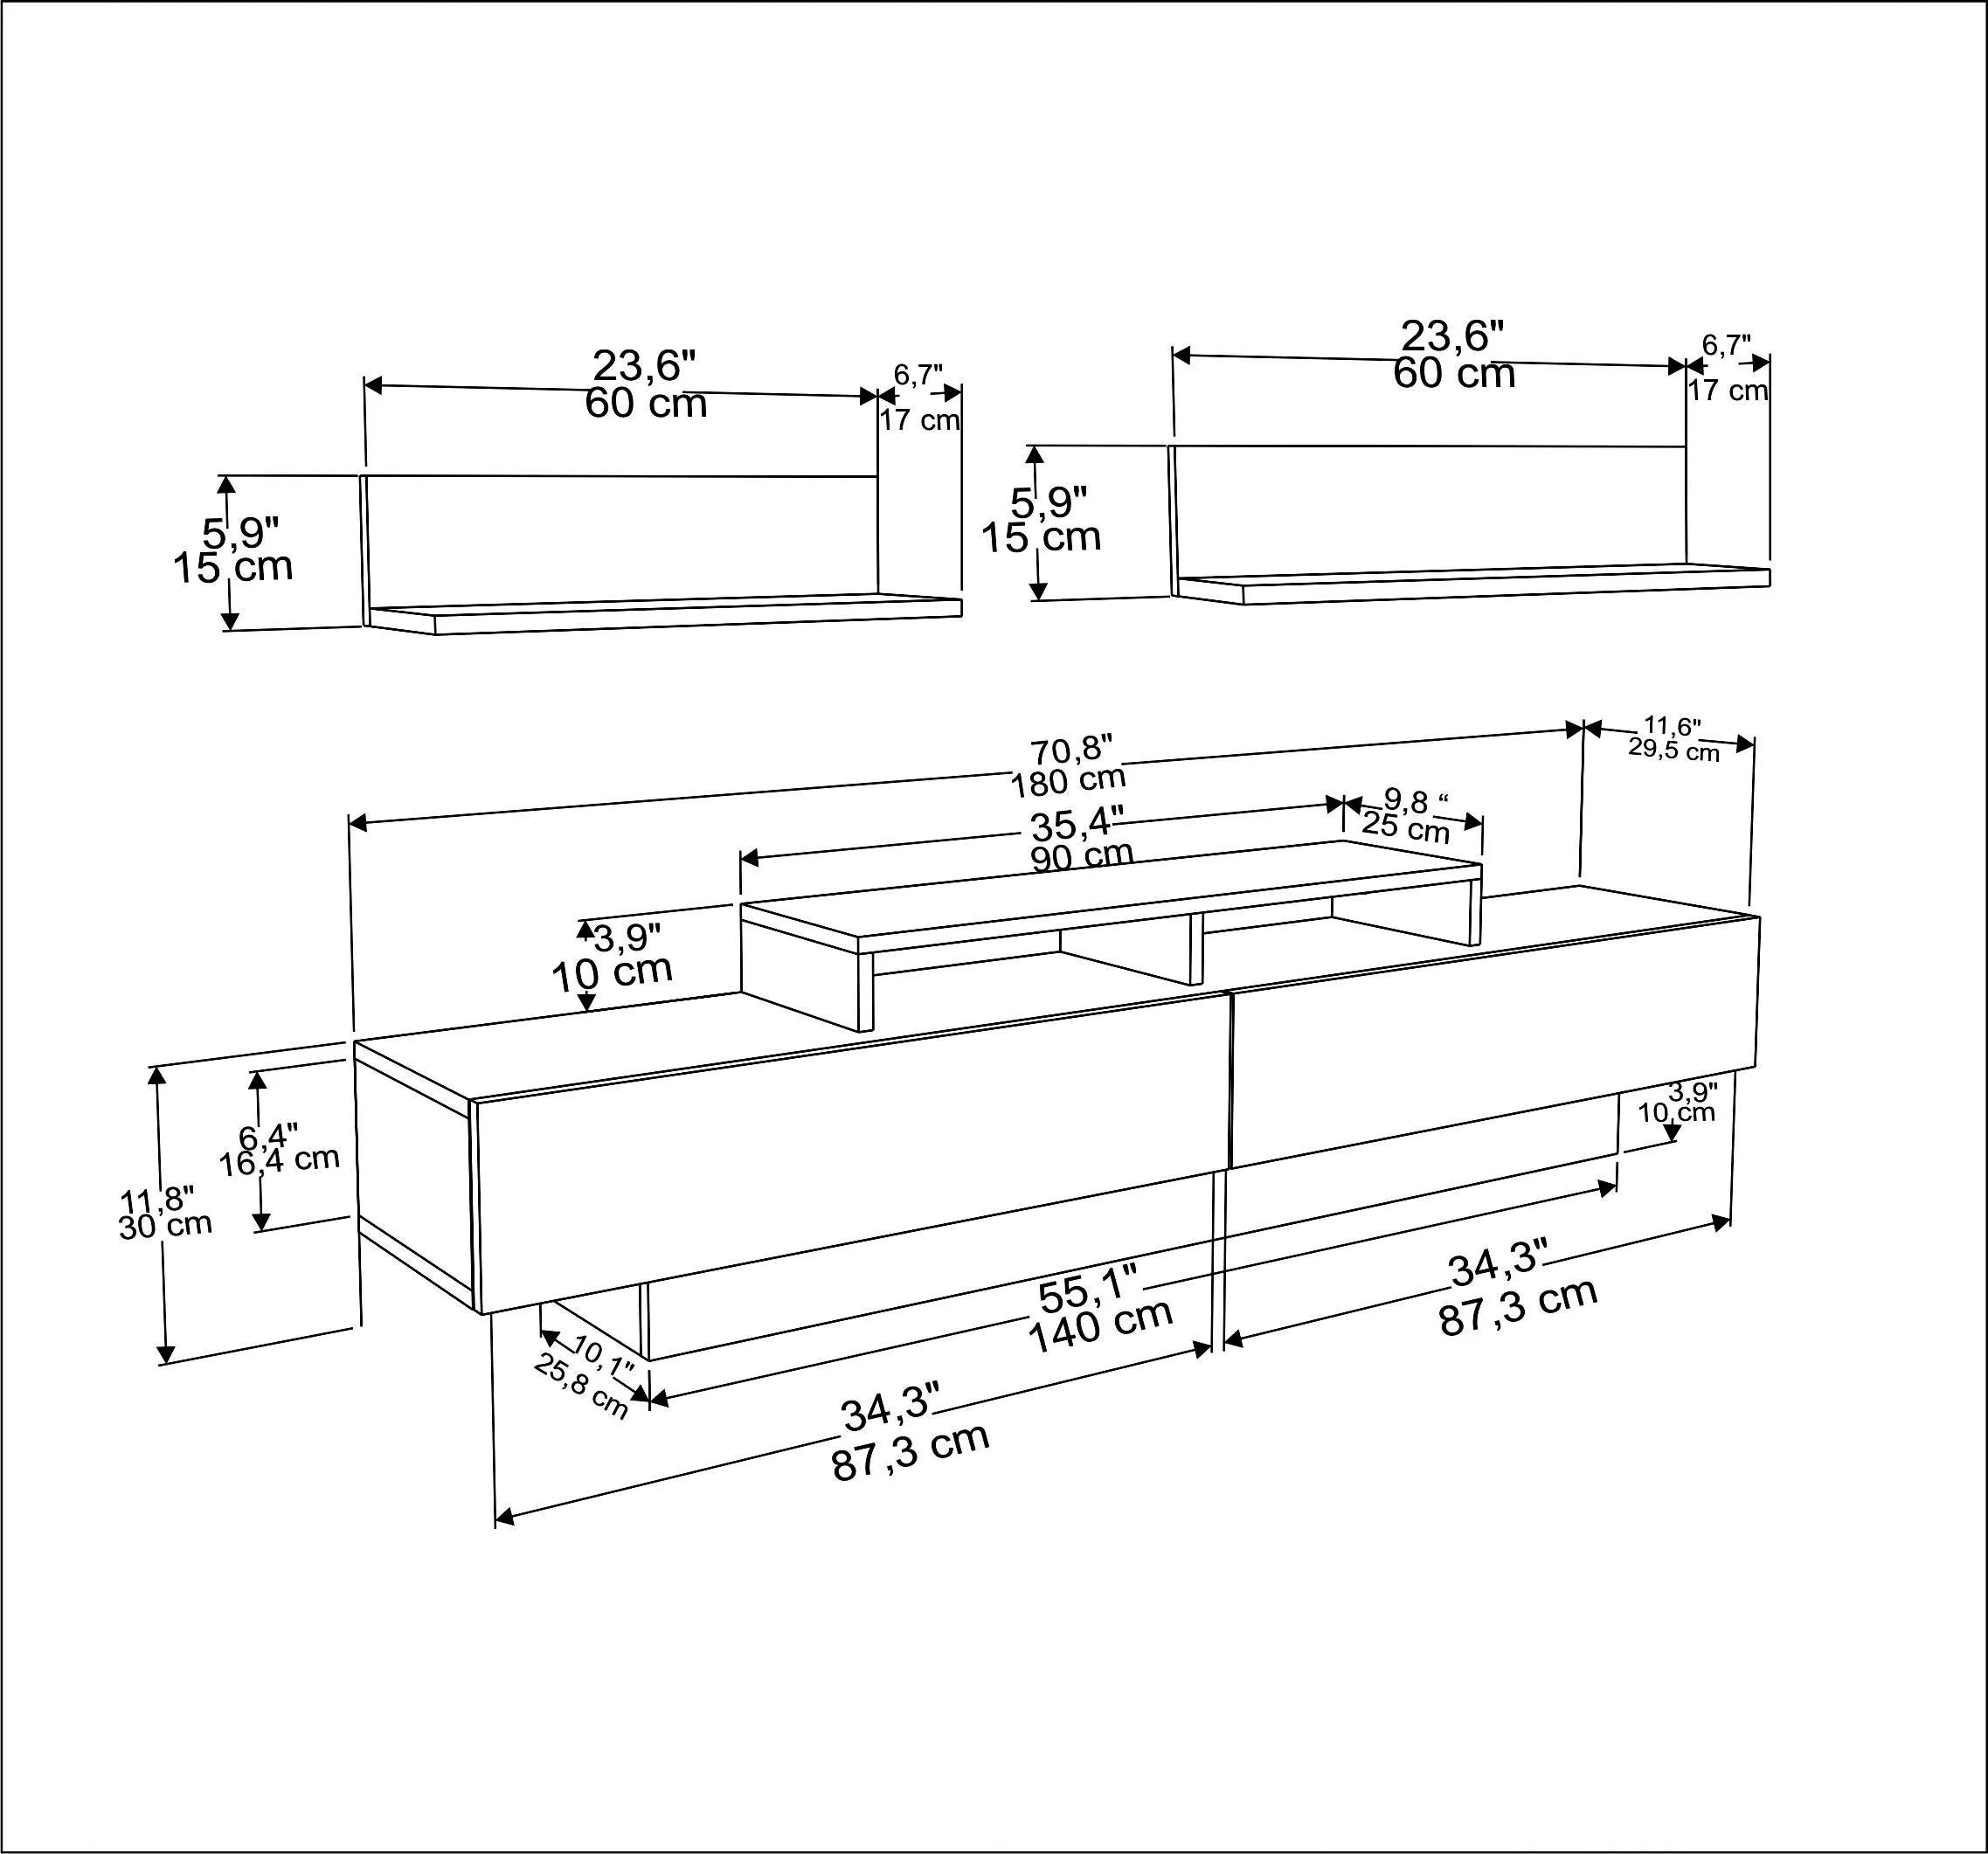 lusi tv stand dimensions chart